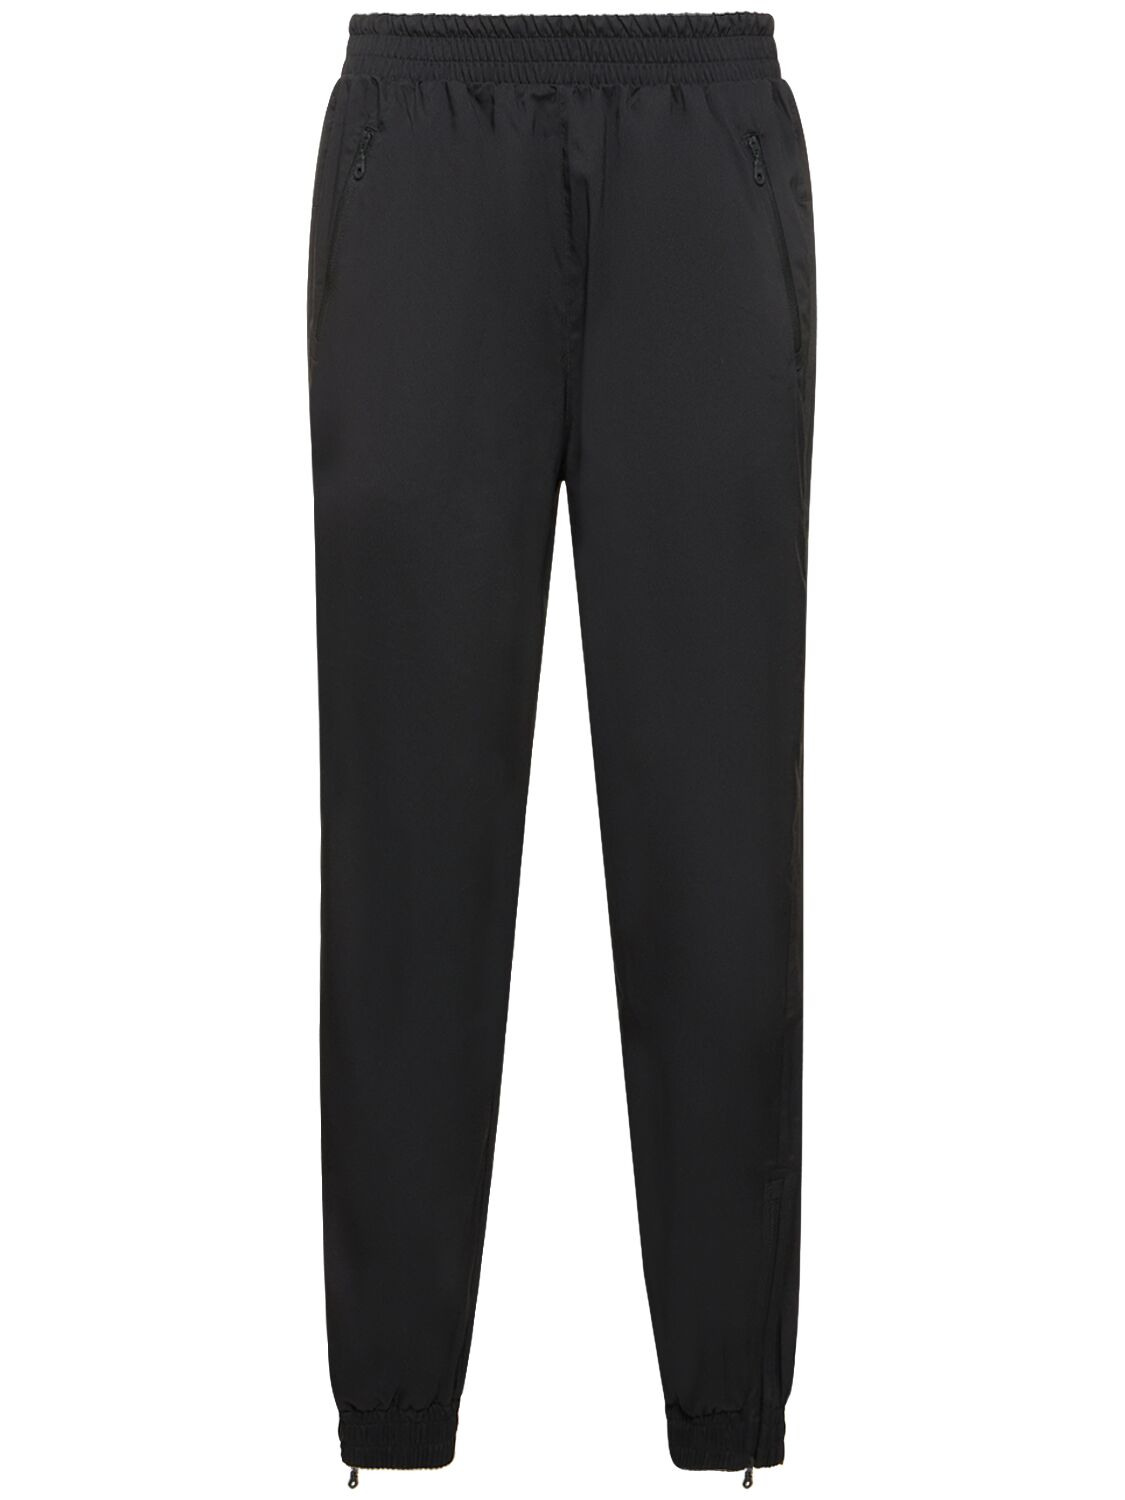 Girlfriend Collective Summit Track Pants In Black